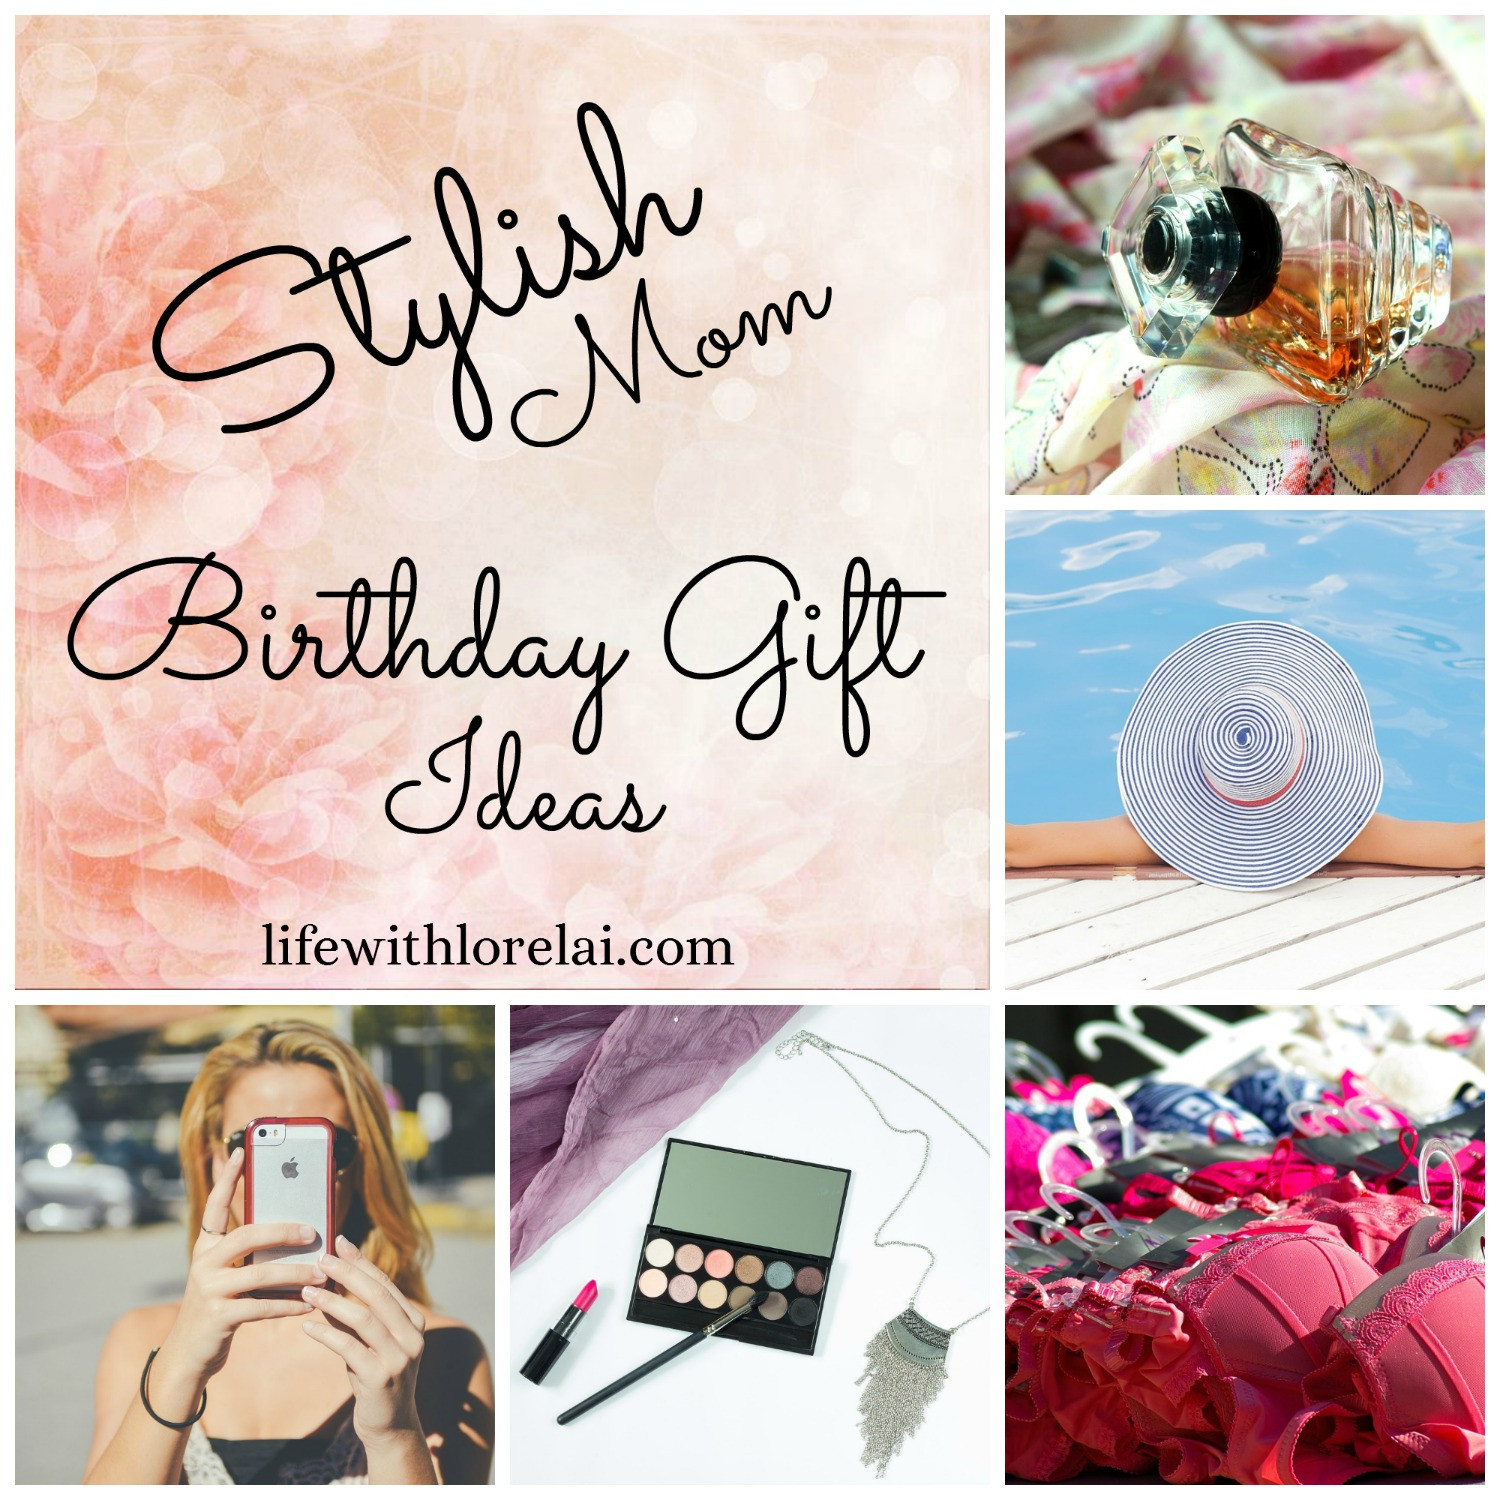 Birthday Gift For Mom Ideas
 Birthday Gift Ideas For The Stylish Mom Life With Lorelai